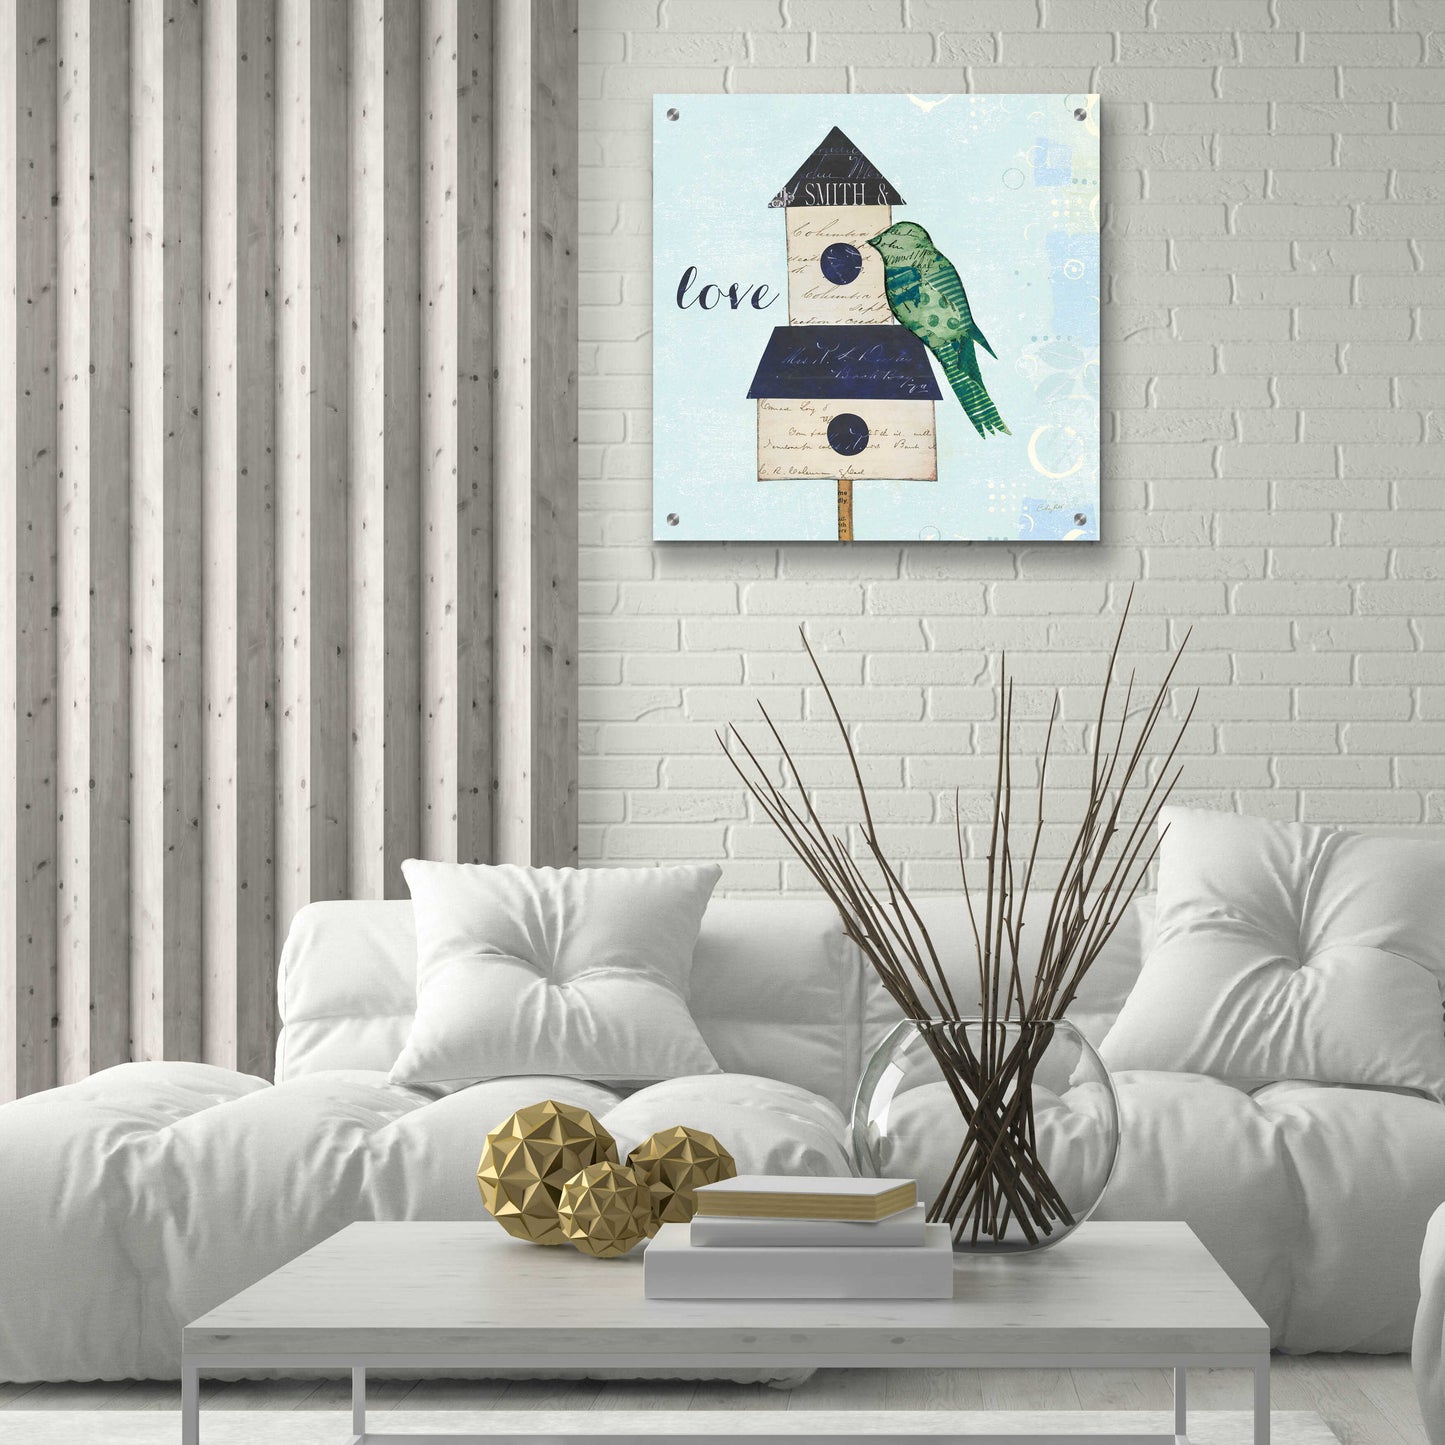 Epic Art 'At Home IV Love' by Courtney Prahl, Acrylic Glass Wall Art,24x24